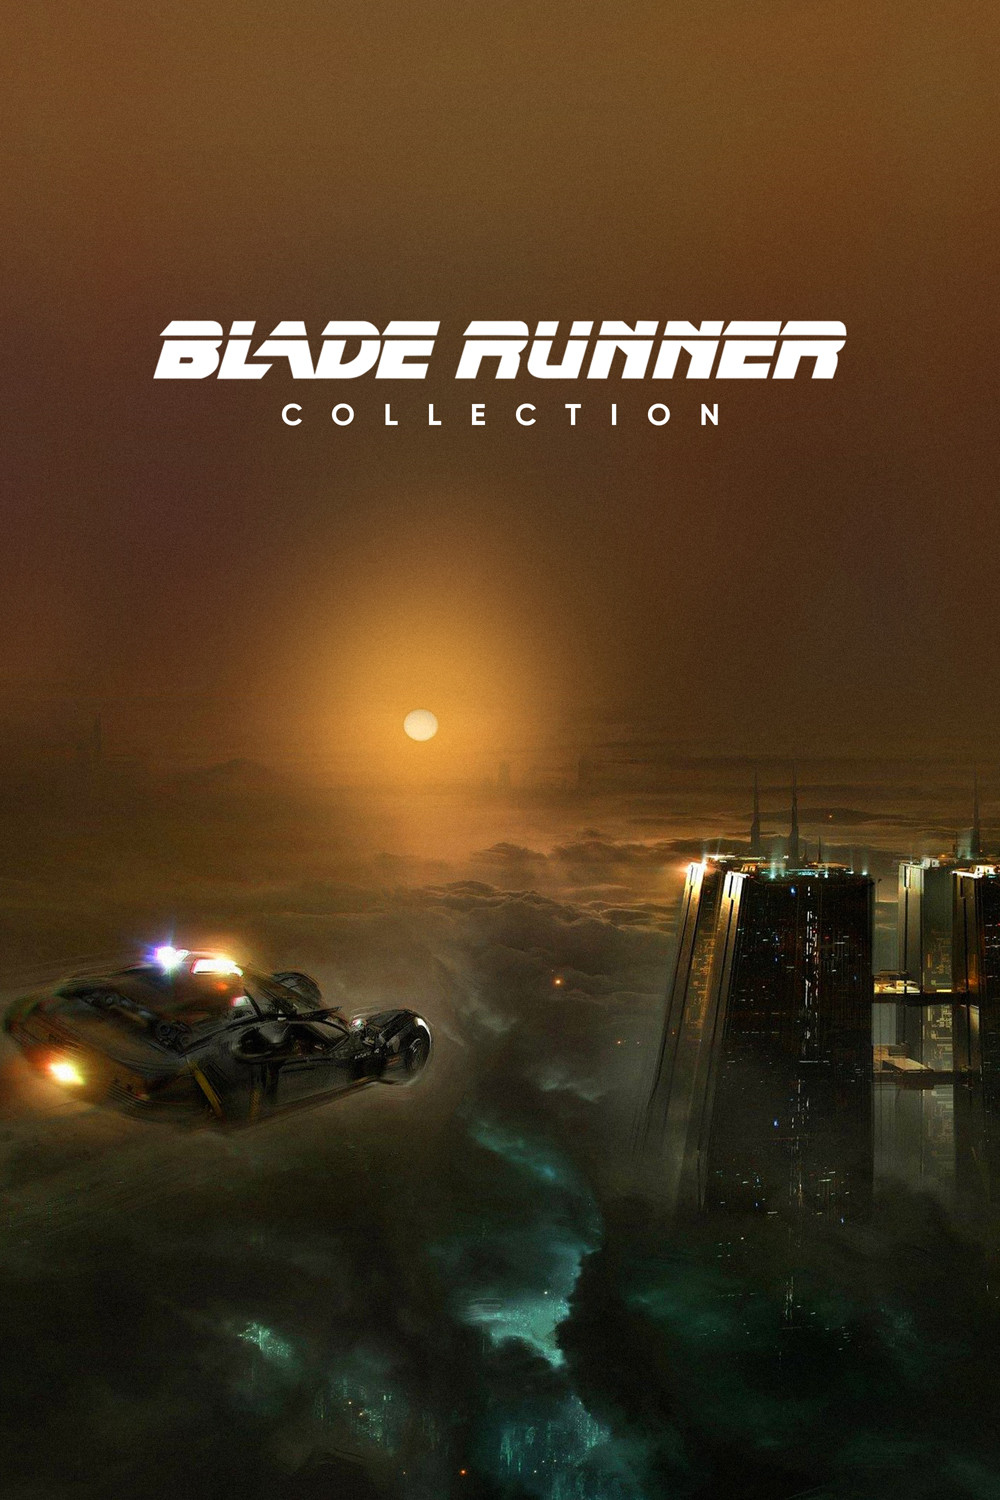 Blade Runner Plex Collection Posters